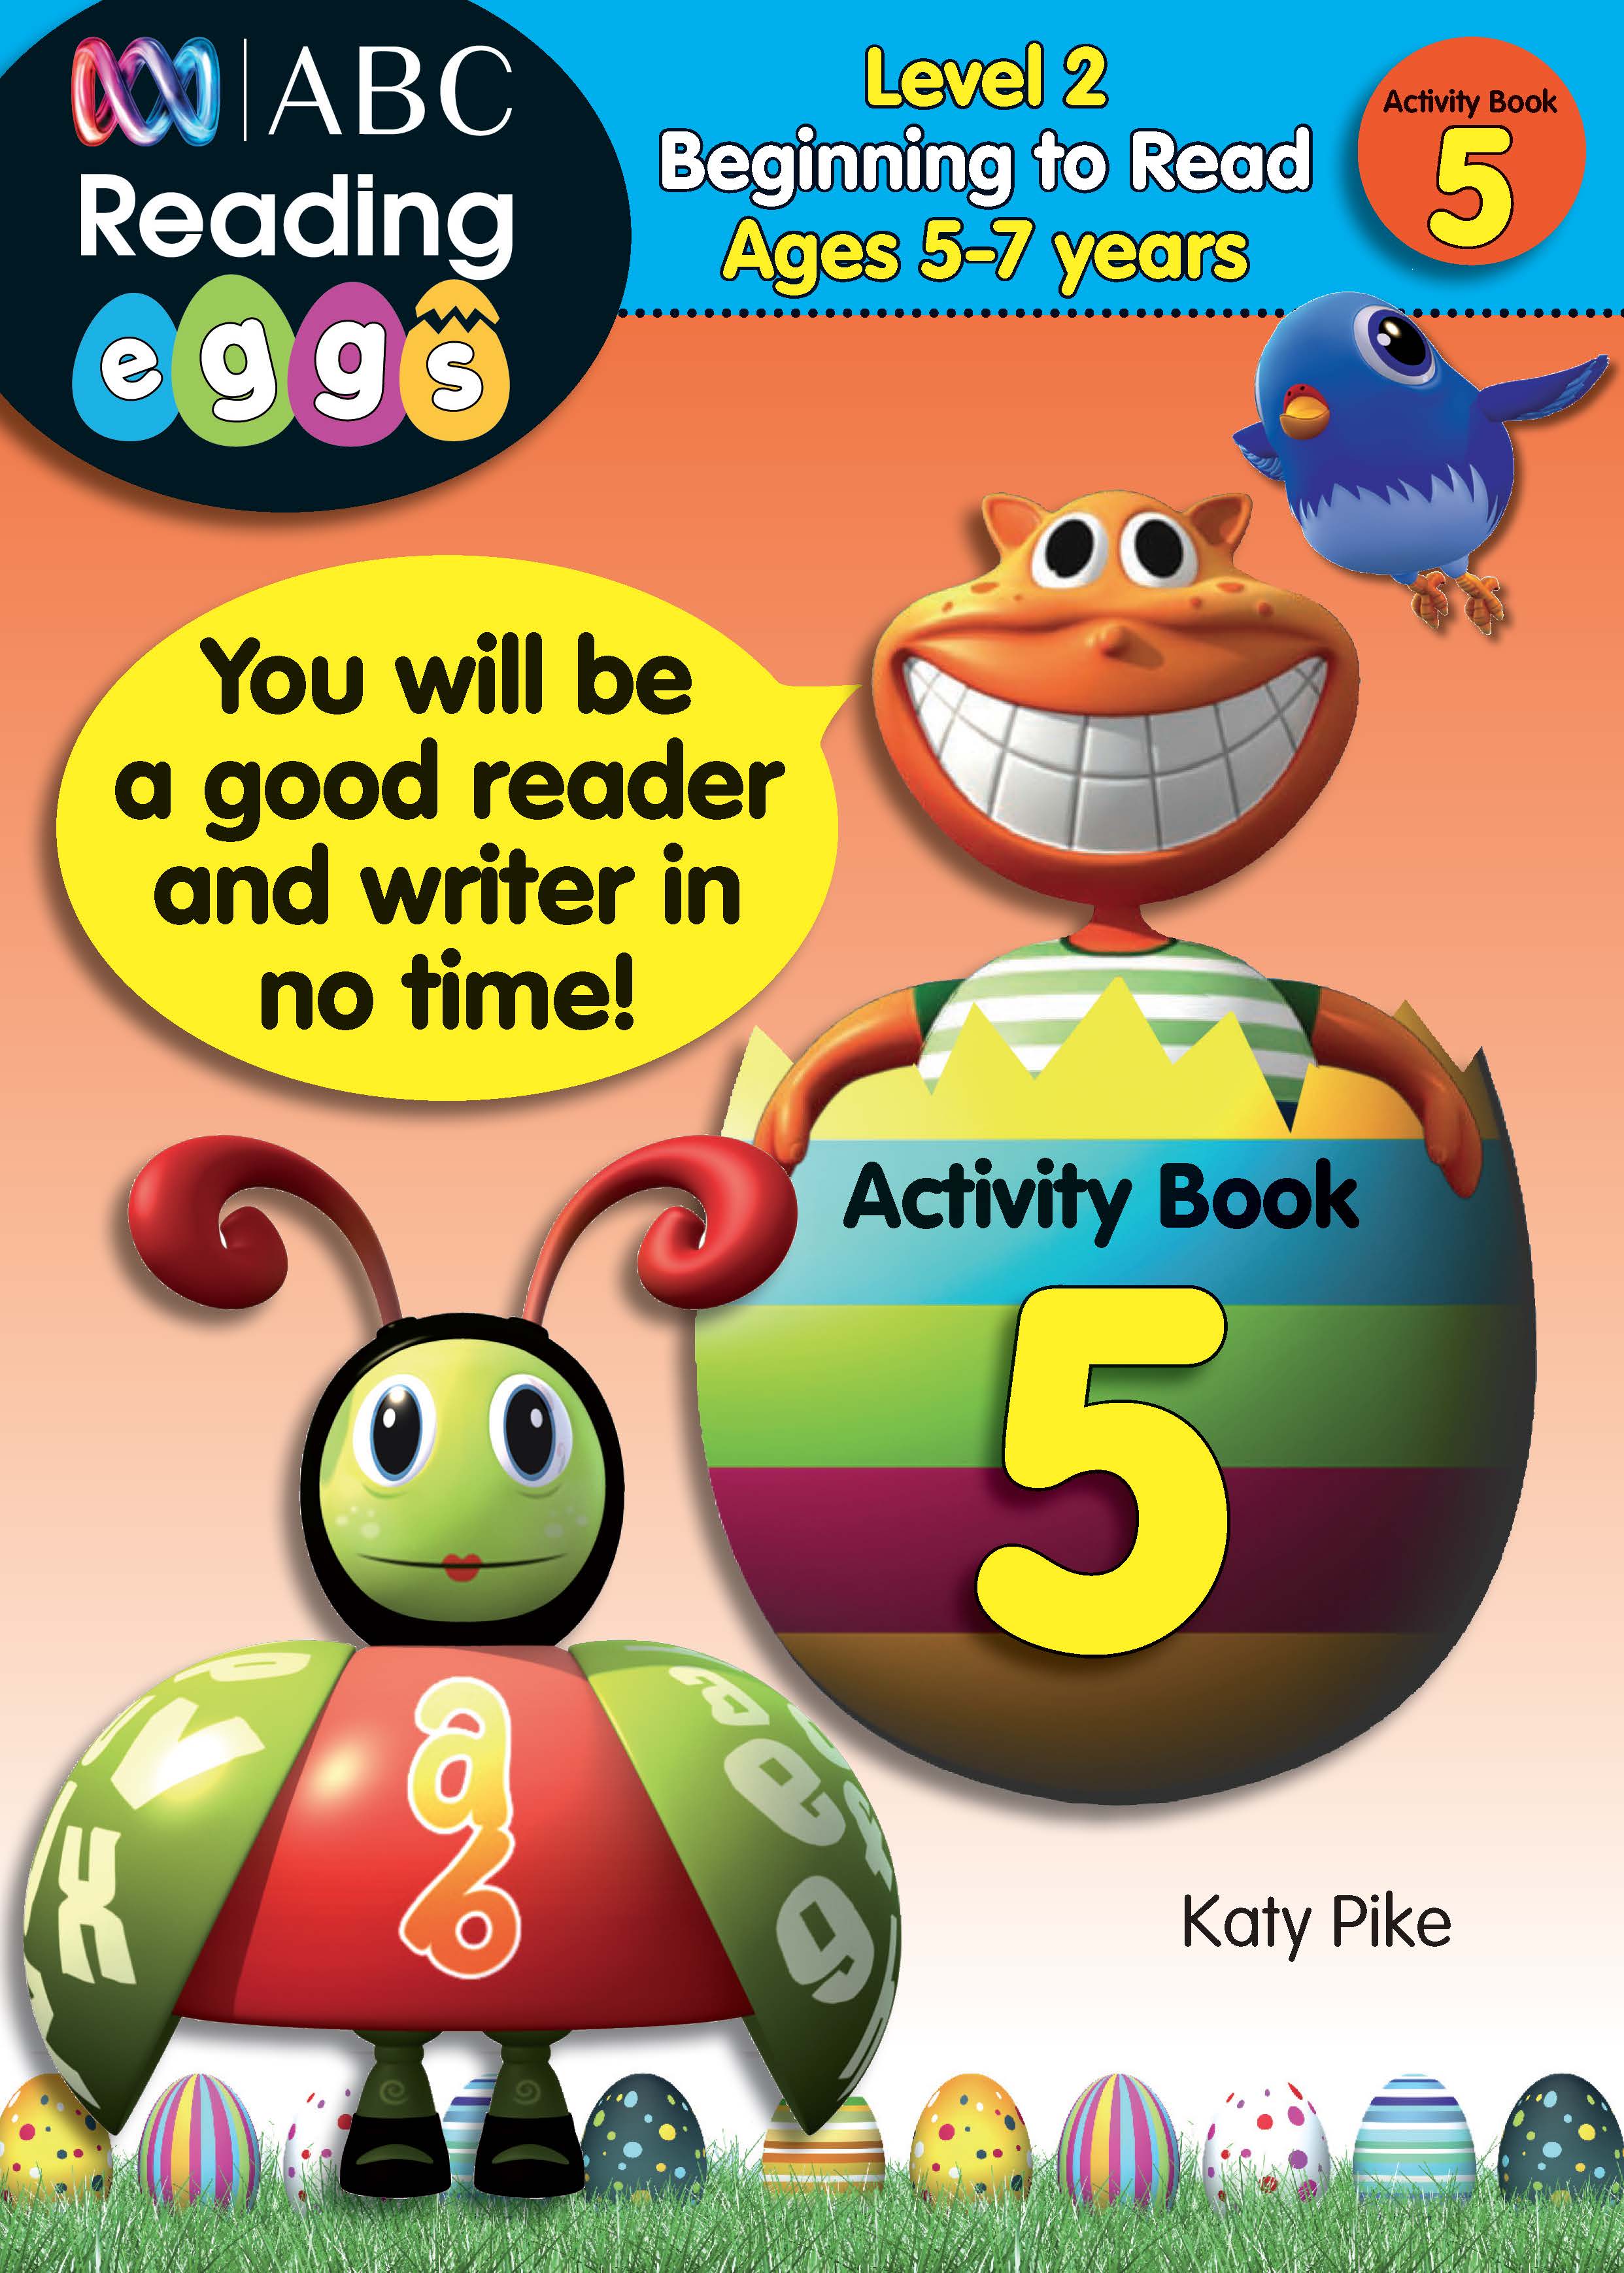 Picture of ABC Reading Eggs Level 2 Beginning to Read Activity Book 5 Ages 5-7